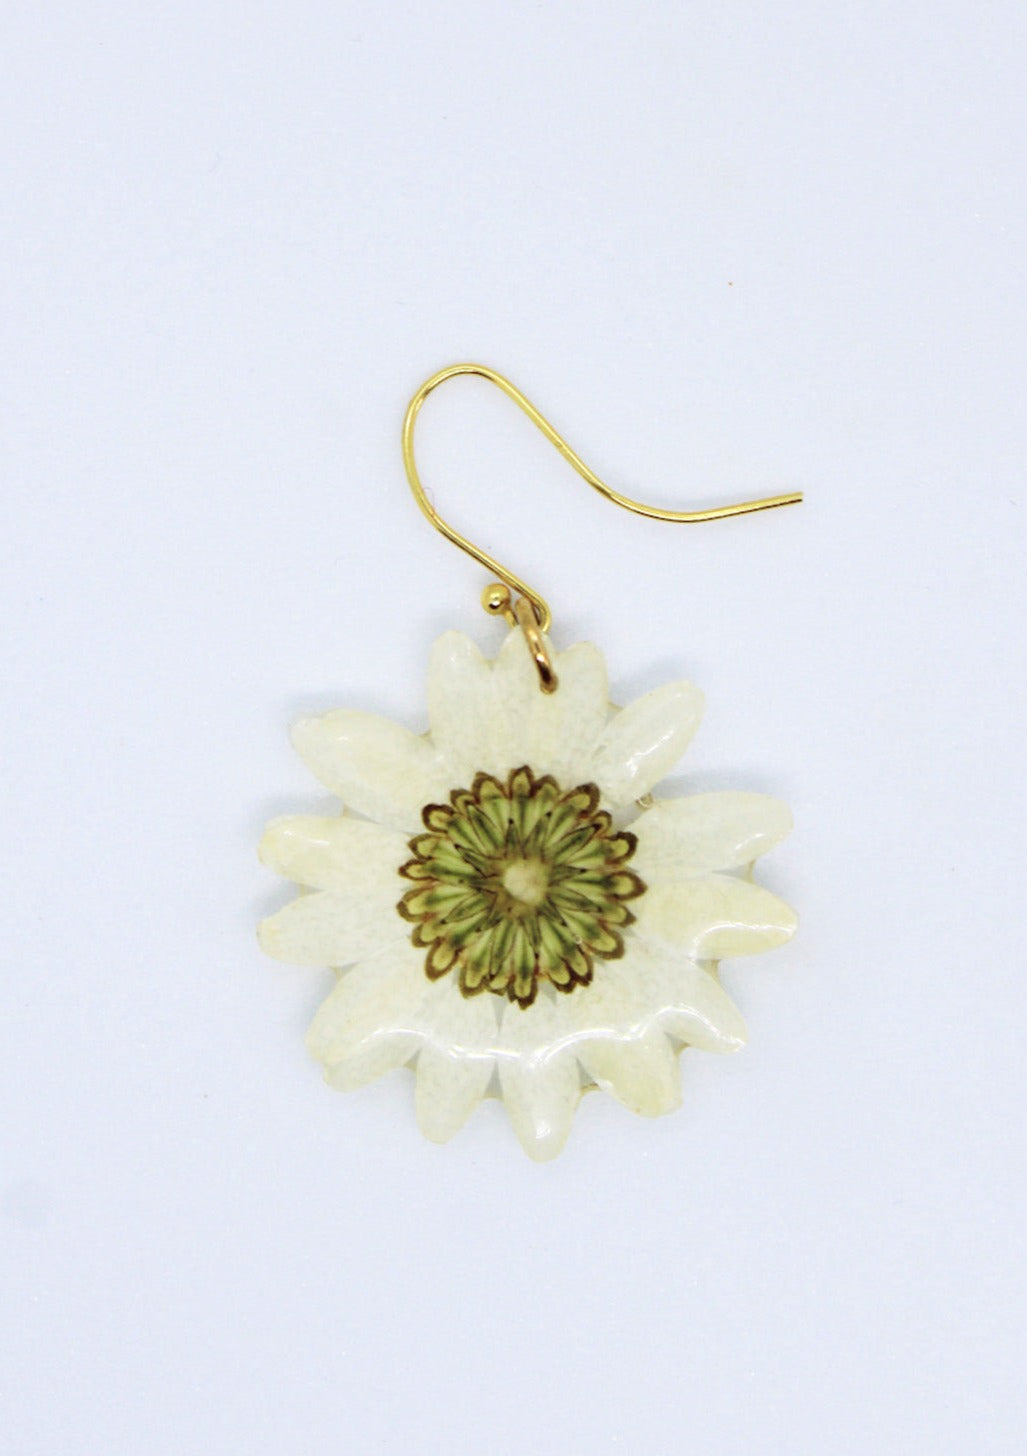 Resin coated miniature white Daisy with yellow center on French Hook Earring